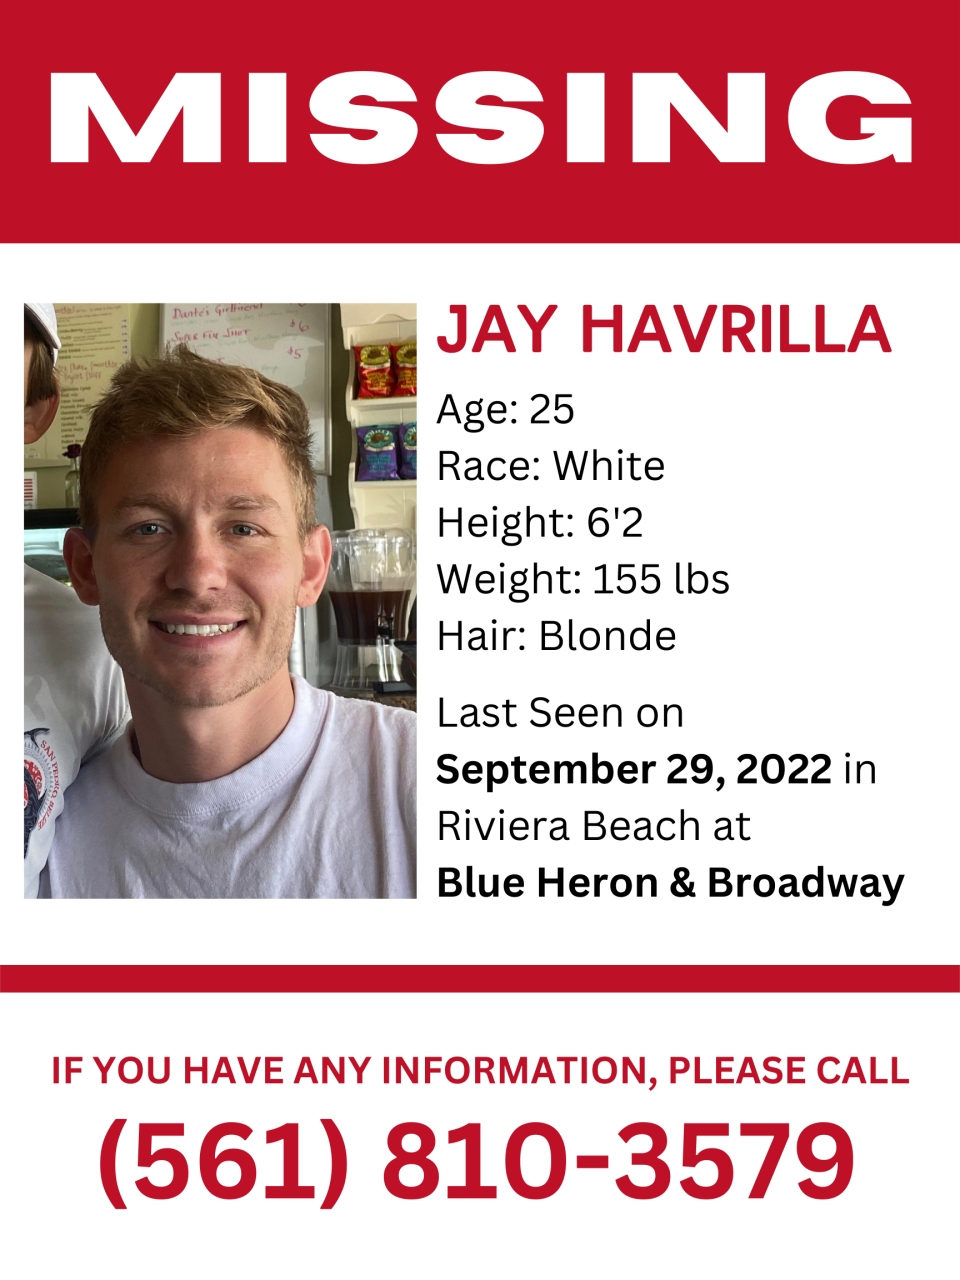 Poster created by Davidson asking for the public's help finding Havrilla